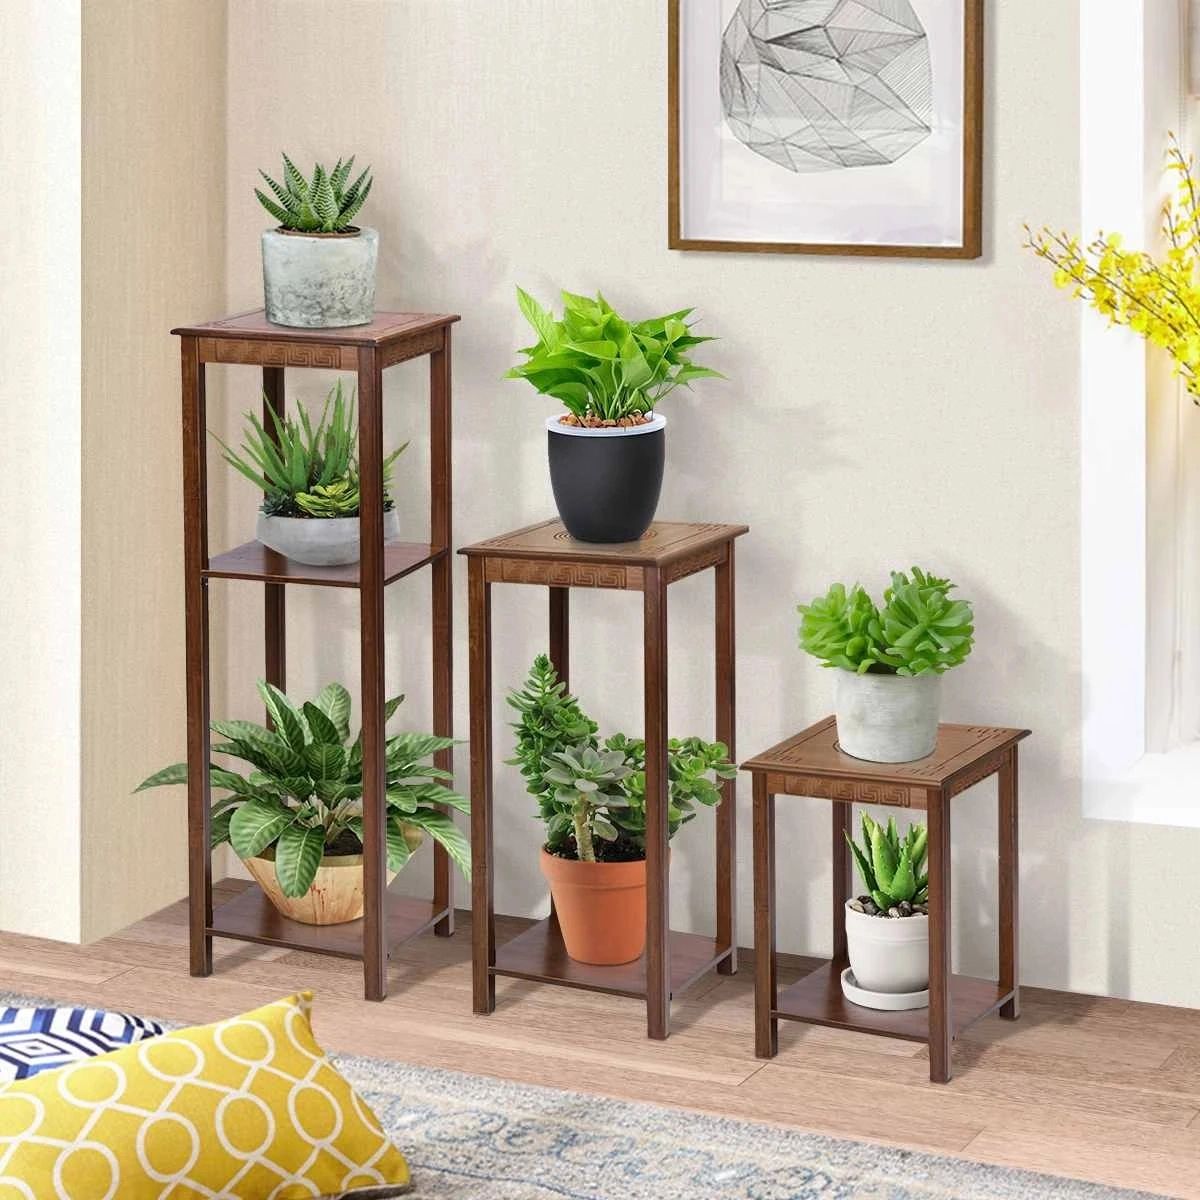 New Multi Layer Chinese Style Bamboo Flower Rack Retro Flower Stand Living  Room Indoor Bonsai Decoration Fish Bowl Frame Storage|plant Shelves| –  Aliexpress Intended For Plant Stands With Flower Bowl (View 11 of 15)